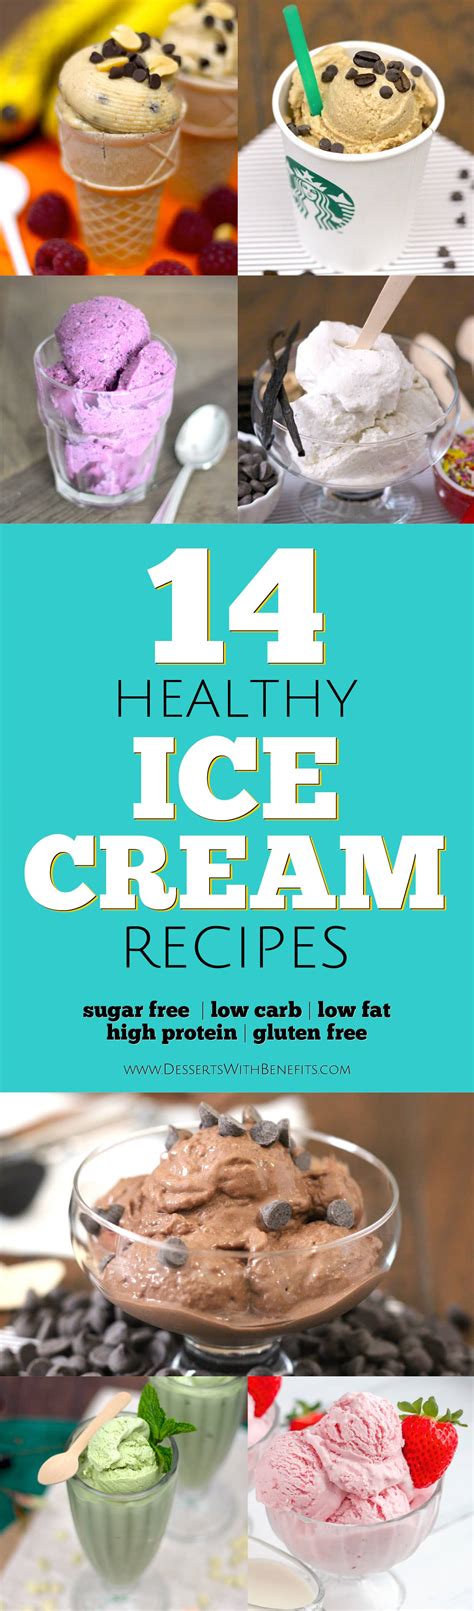 healthy-ice-cream-recipes-sugar-free-low-carb-low image